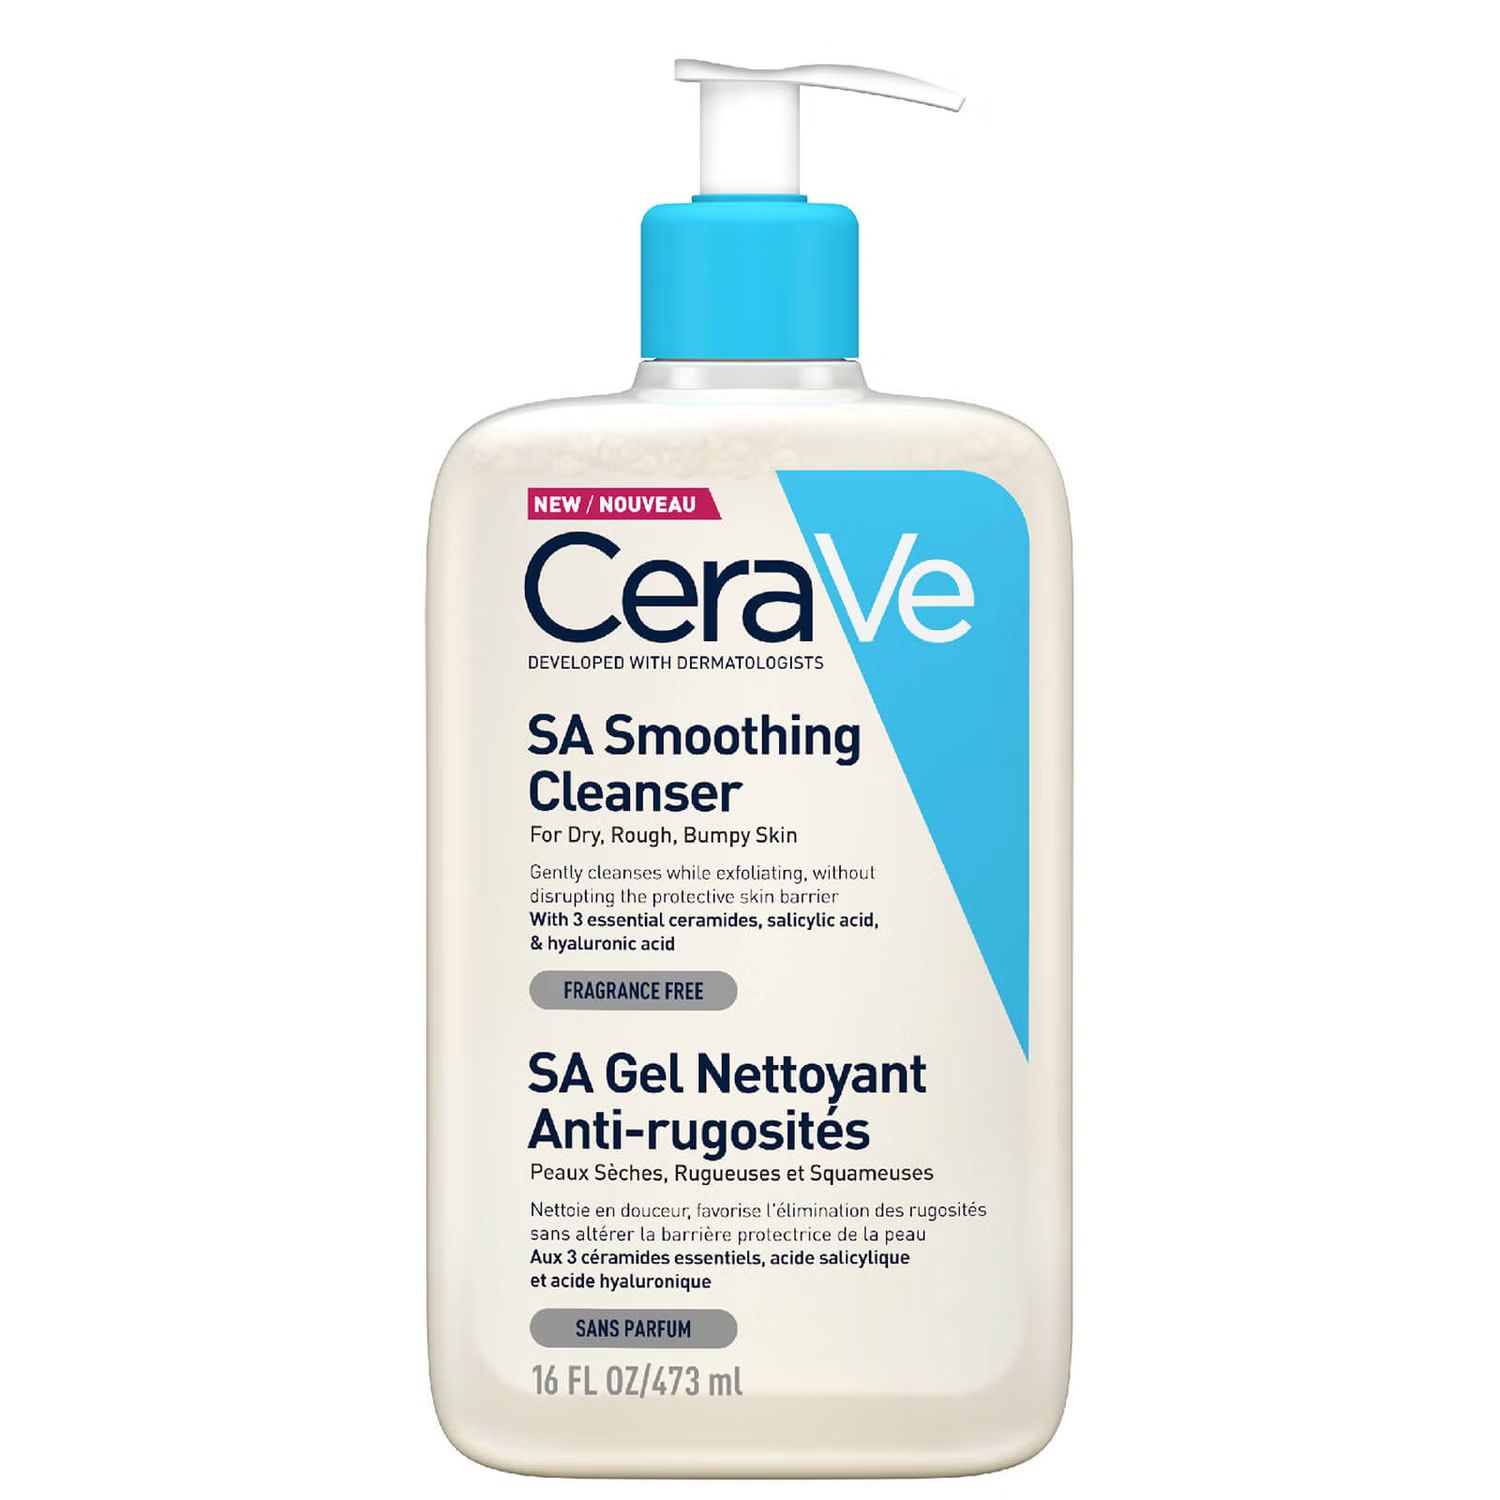 CeraVe SA Smoothing Cleanser with Salicylic Acid for Dry, Rough & Bumpy Skin 473ml | Look Fantastic (UK)